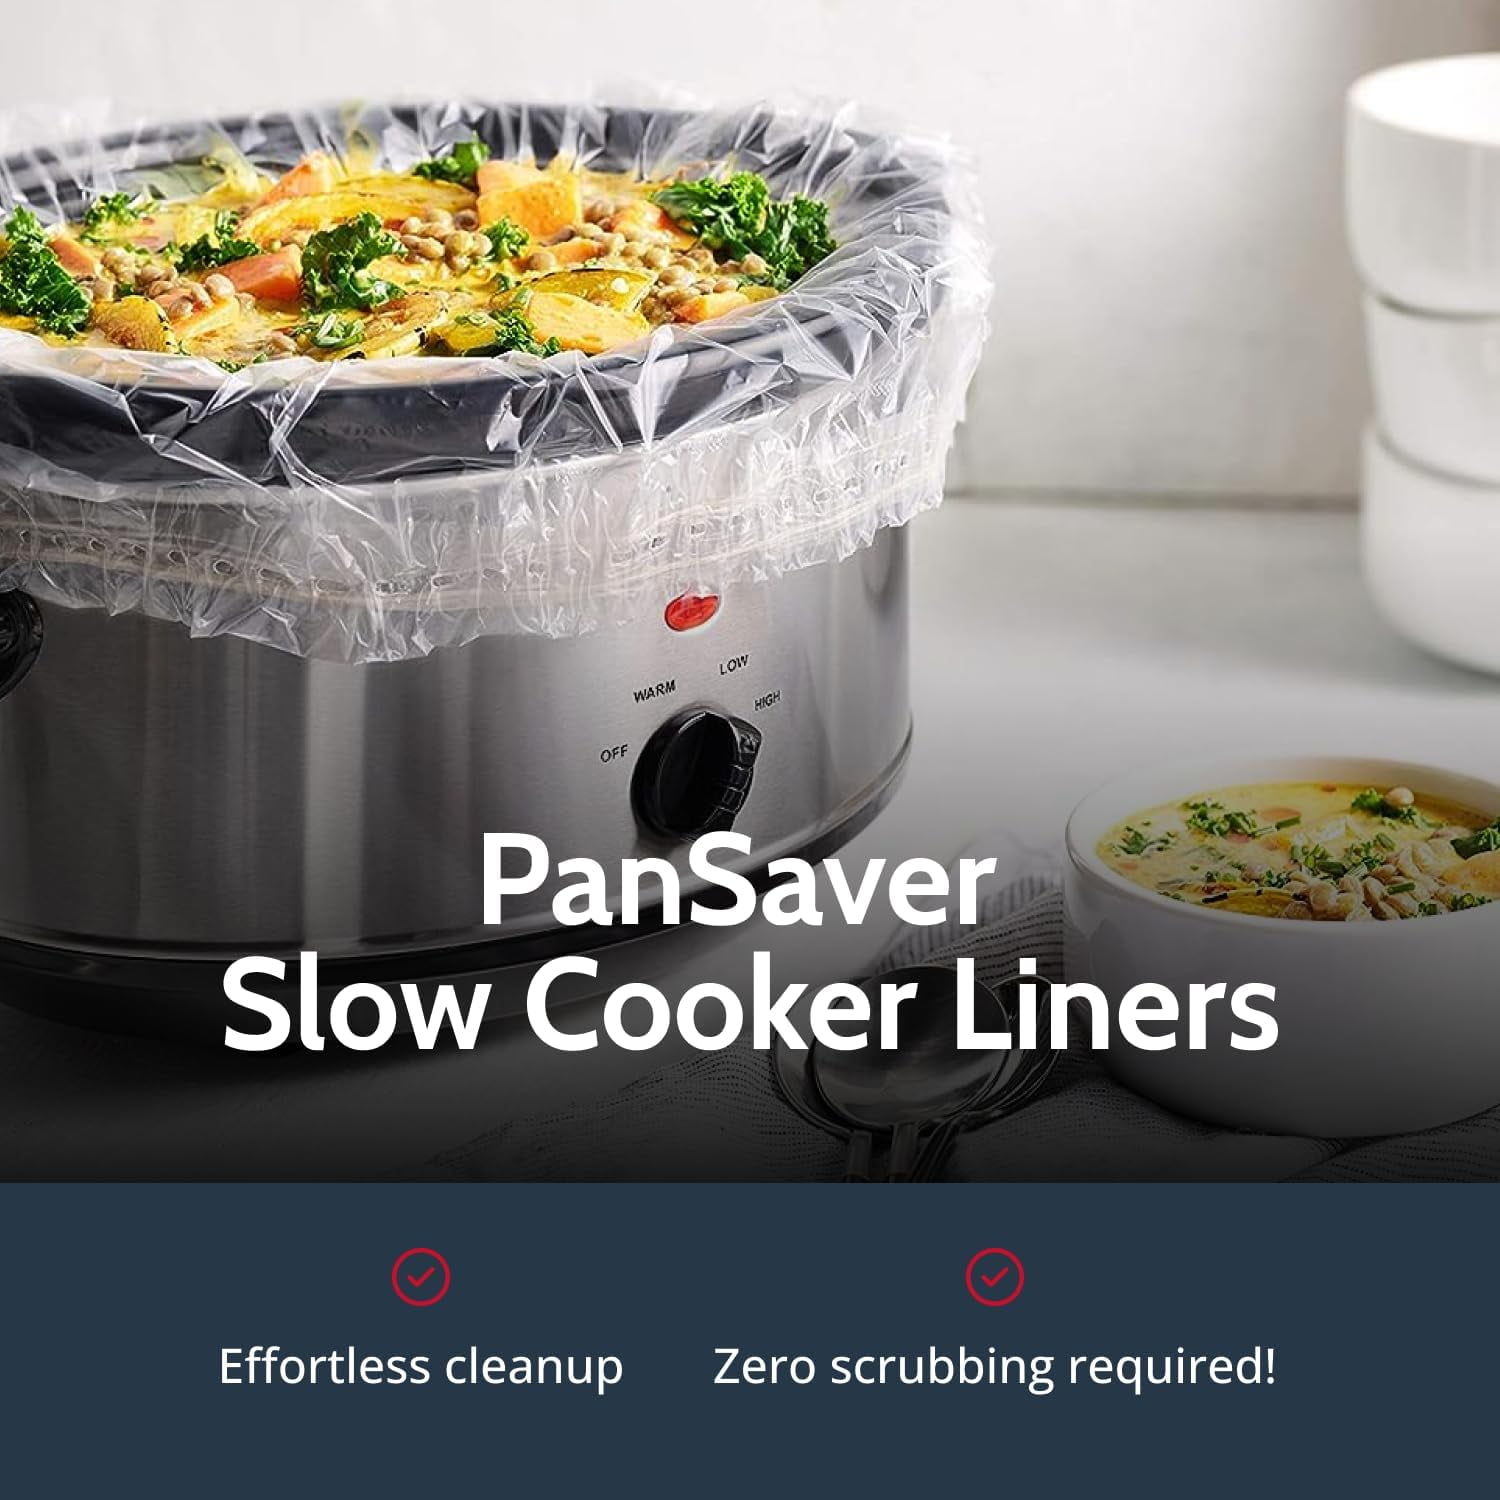 Pansaver 12 Pack Disposable Slow Cooker Liners Crockpot Liners Small Quart Cookers Liners with A Sure Fit Band - FDA Certified, NSF Approved, KOFK